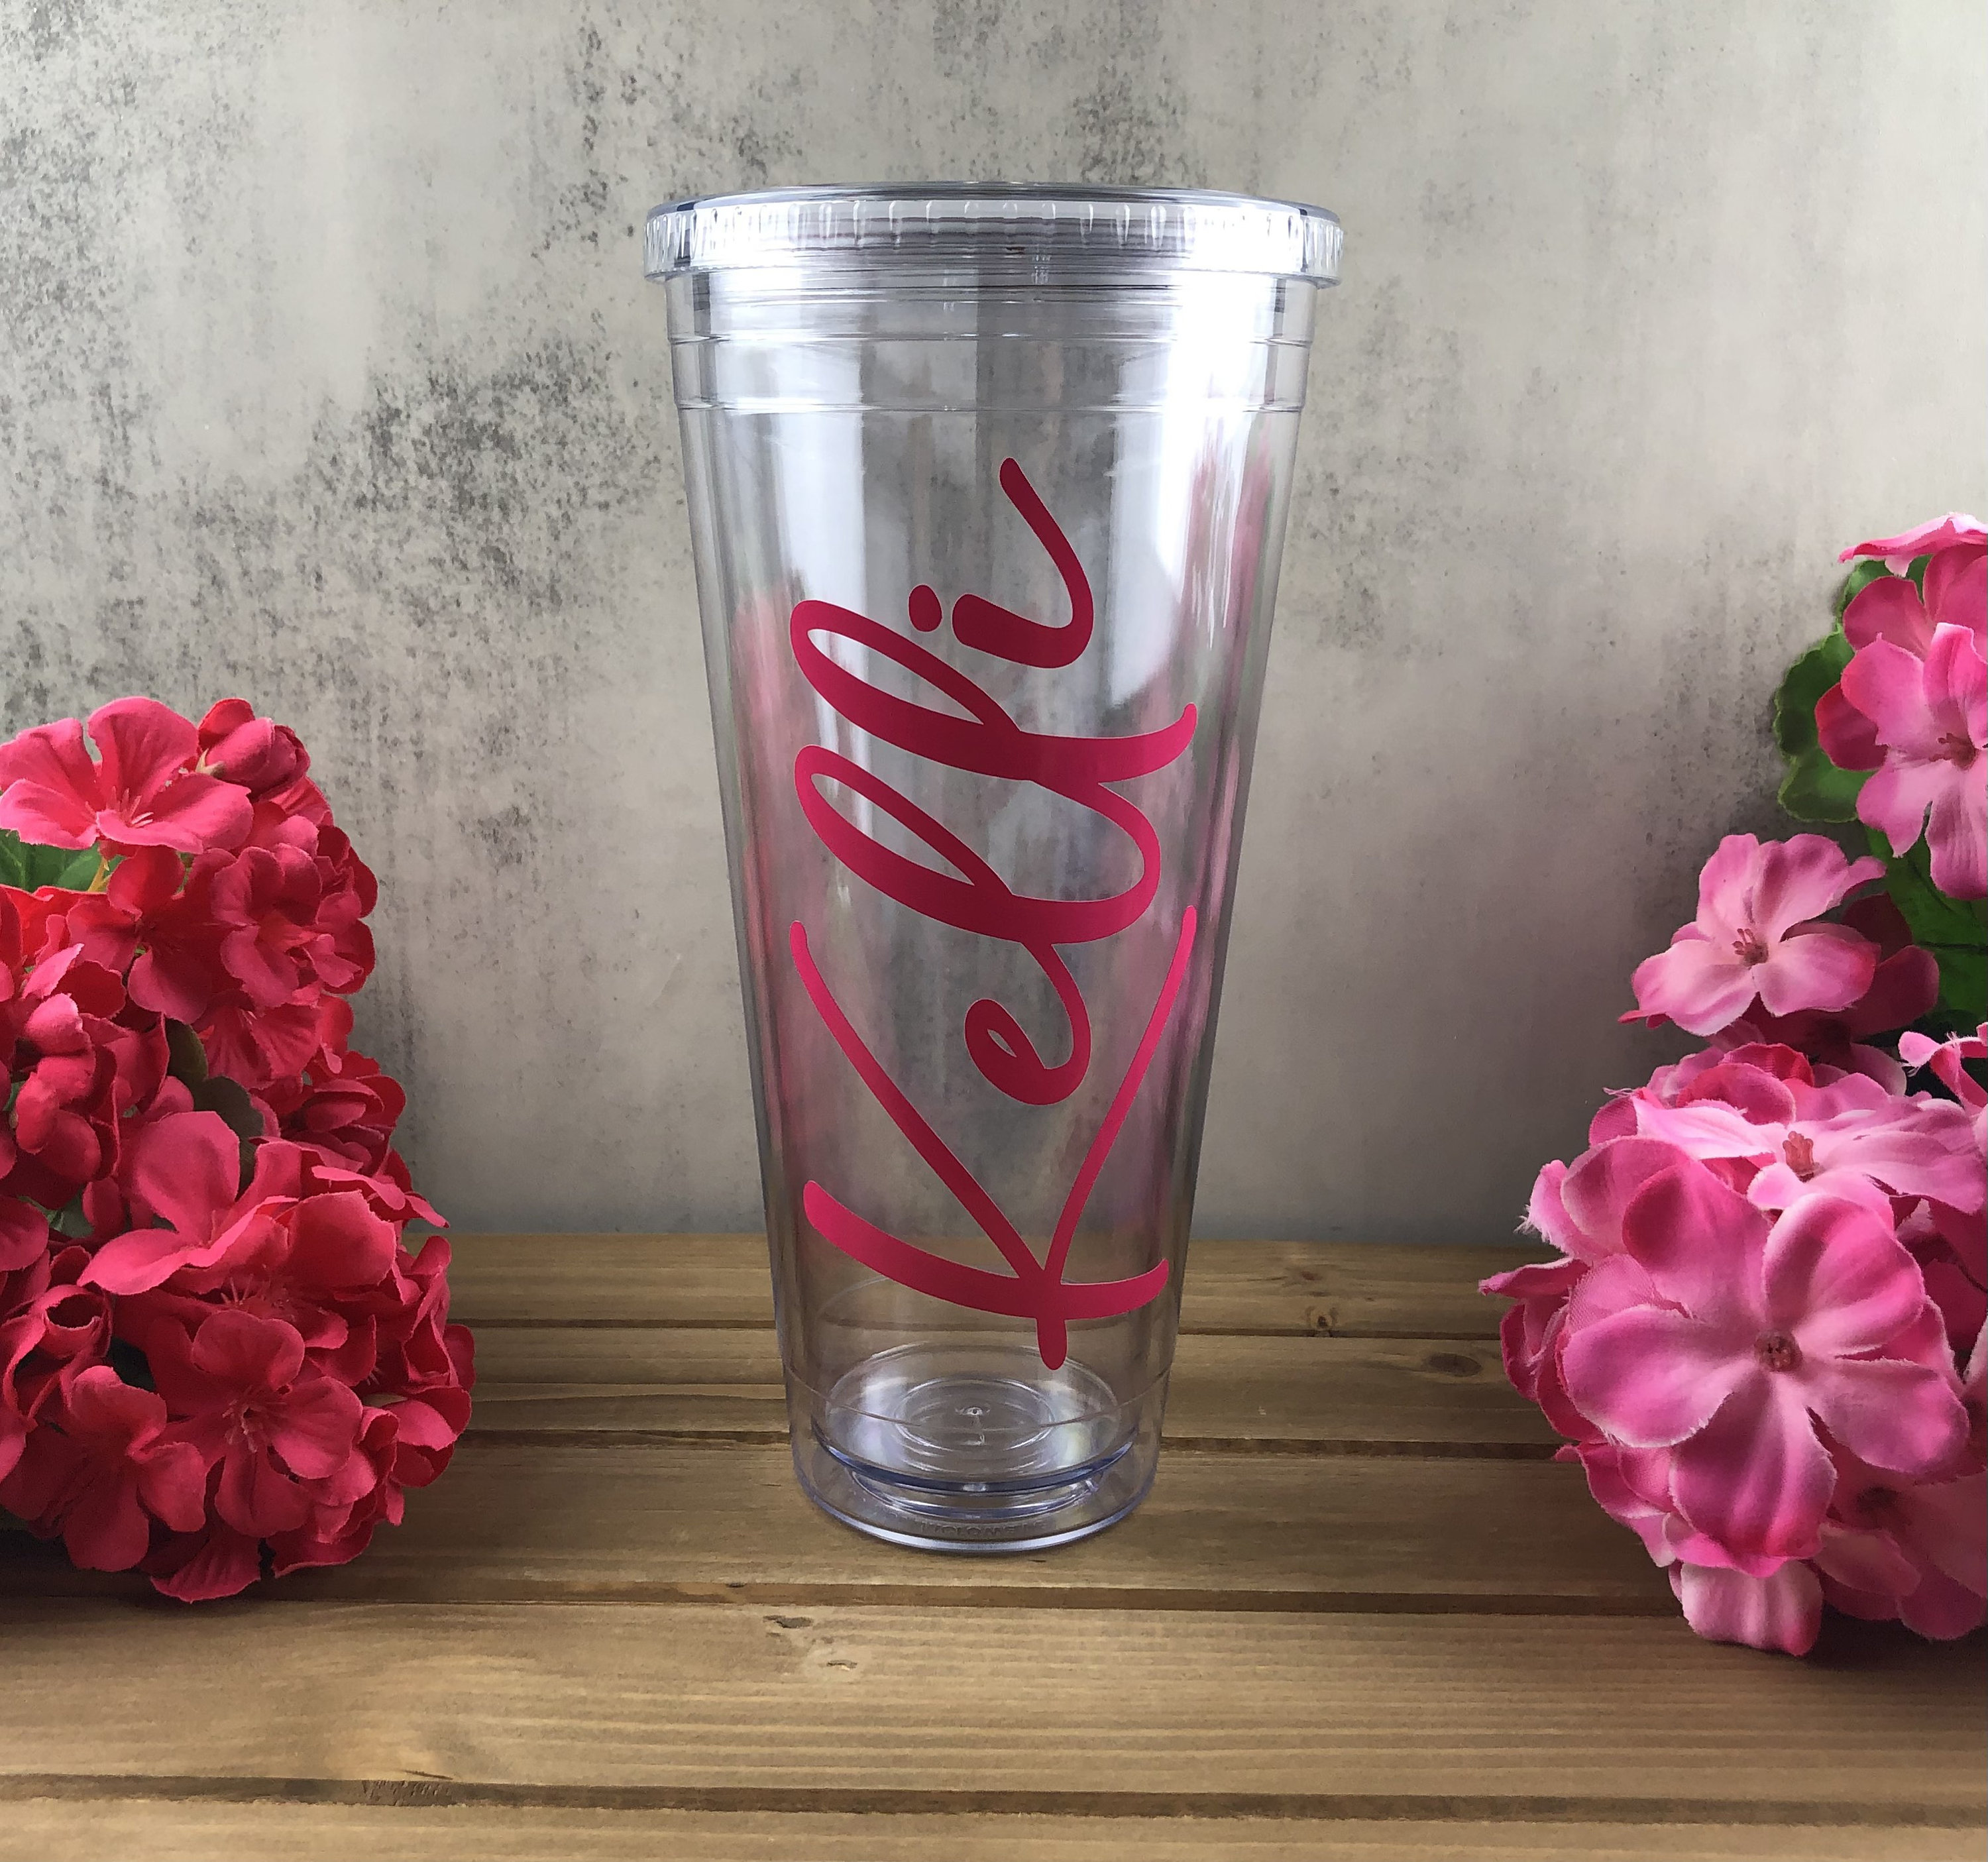 Any Message Personalized 17 oz. Acrylic Insulated Tumbler